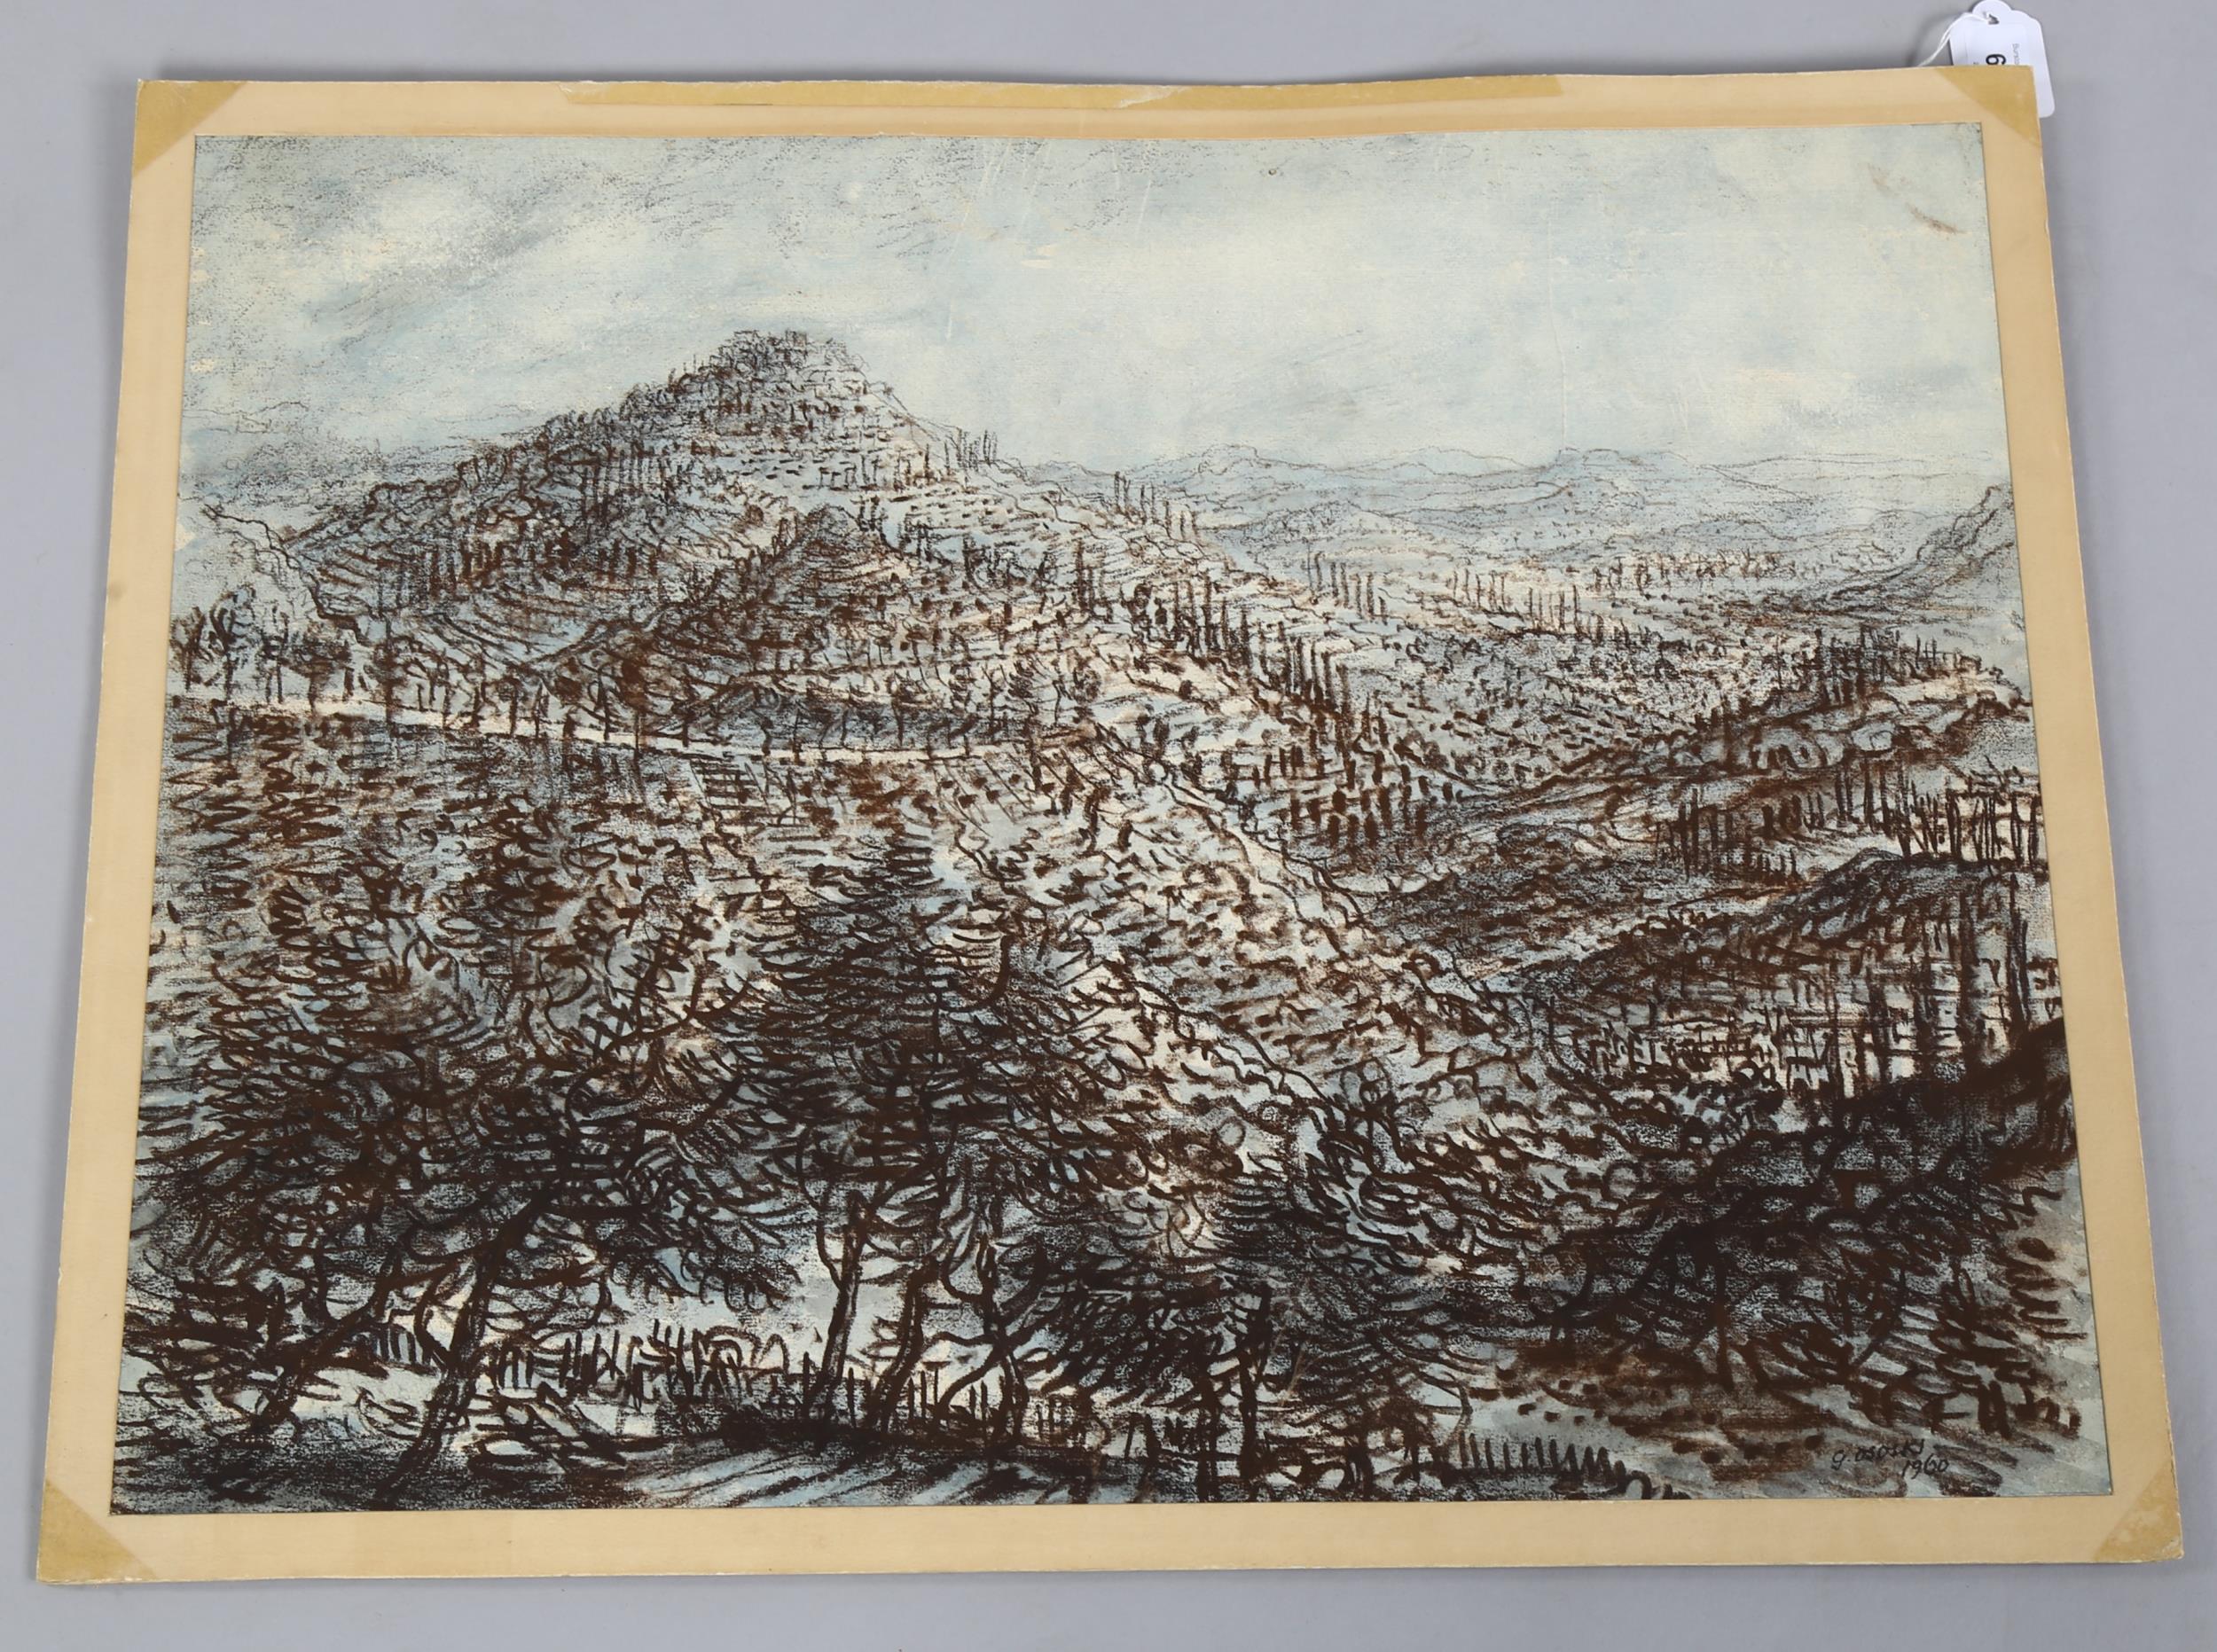 Gerald Ososki, Tuscany landscape, crayon/pastel on card, exhibited at the RBA 1960, signed, 47cm x